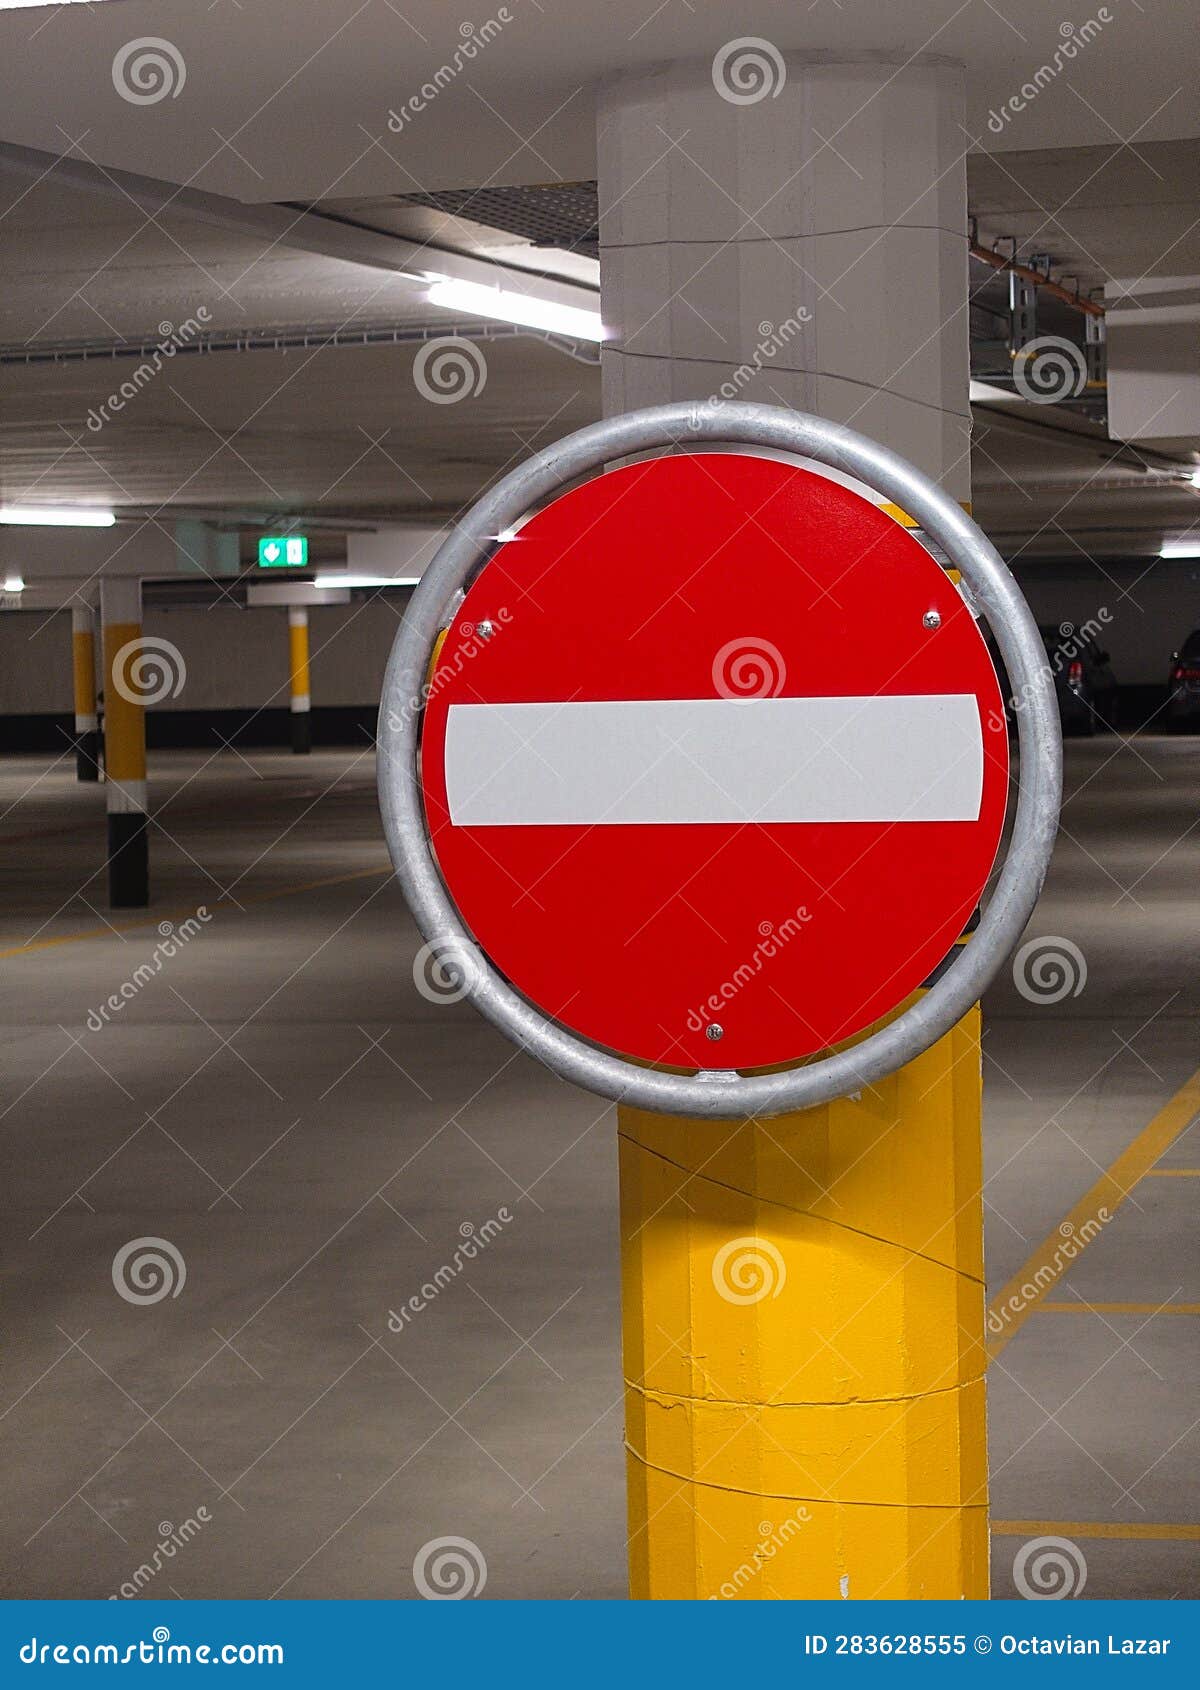 https://thumbs.dreamstime.com/z/access-prohibited-forbidden-road-traffic-sign-pole-inside-underground-car-park-no-people-283628555.jpg